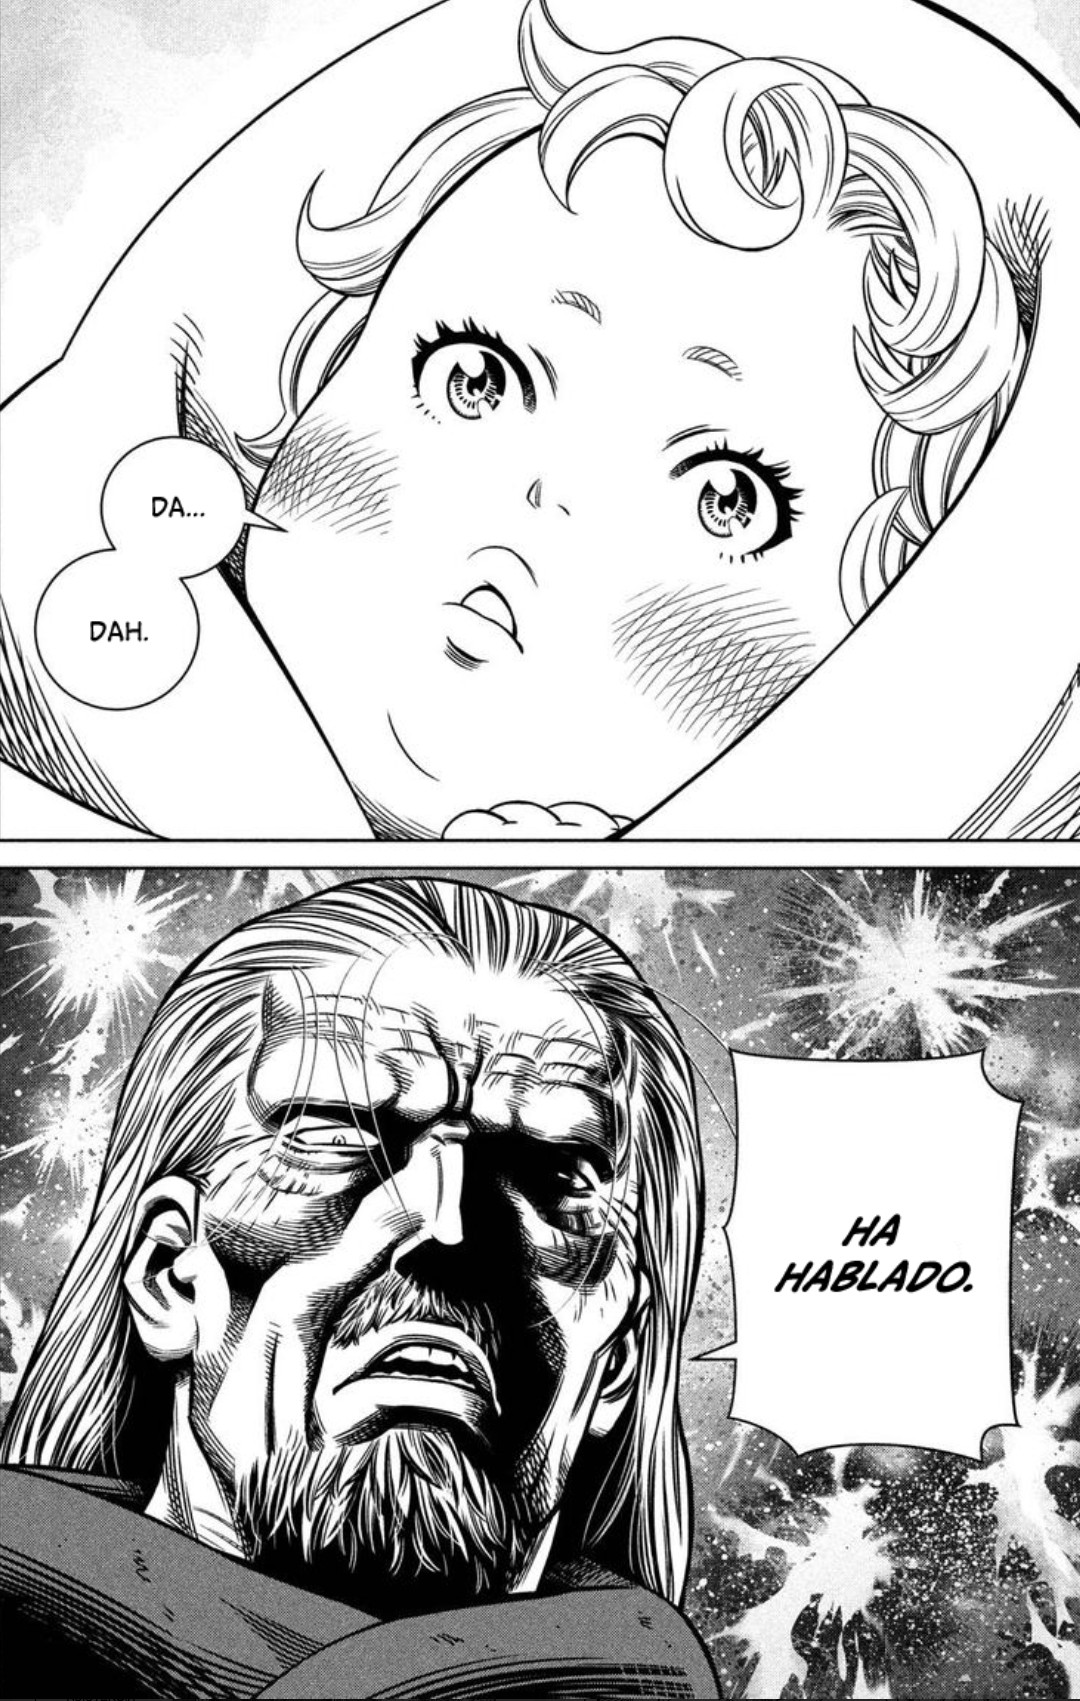 AEW • 金木 研 • Real Madrid🇪🇦 on X: "After several months of waiting, I was  able to read chapter 174 of the Vinland Saga manga🔥🔥💙😭😭.In this image,  #Halfdan reacts that way